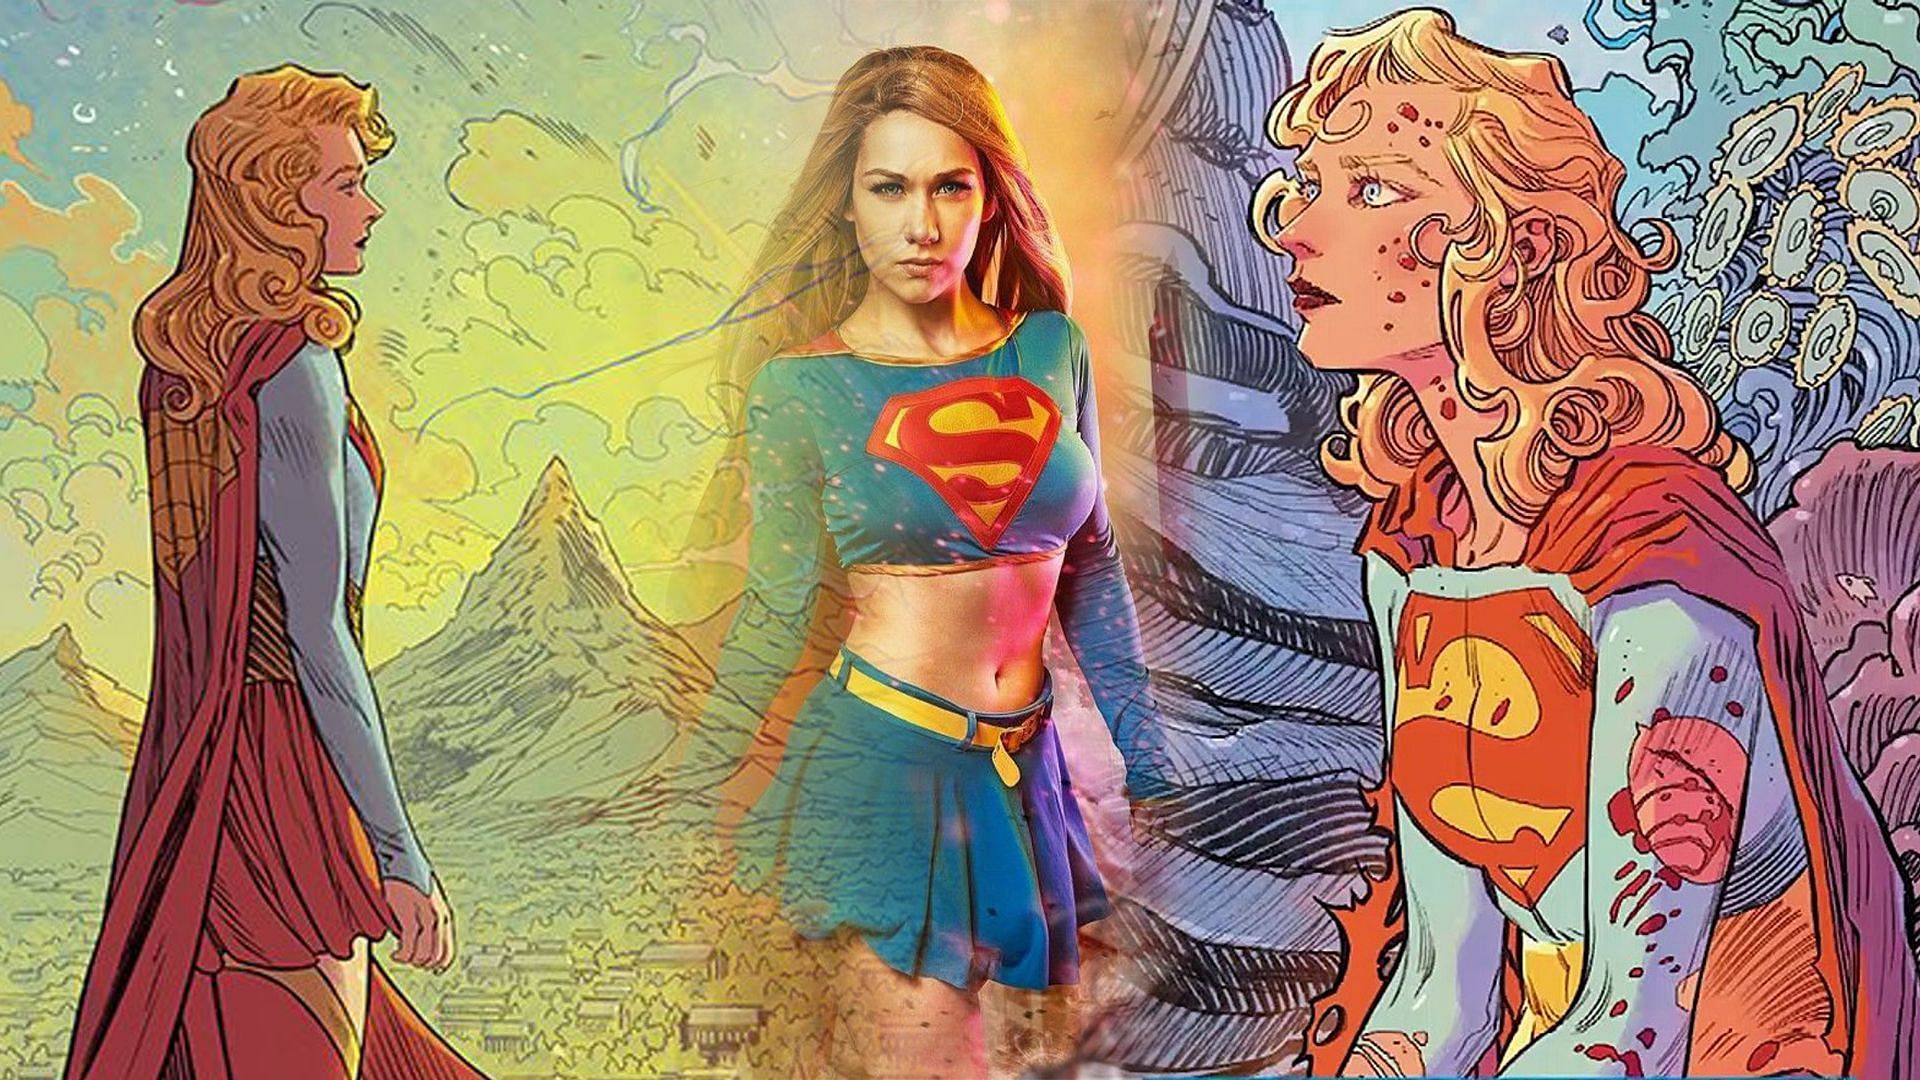 Supergirl: Woman of Tomorrow is an exciting new comic book series written by Tom King. (Image Via Sportskeeda)